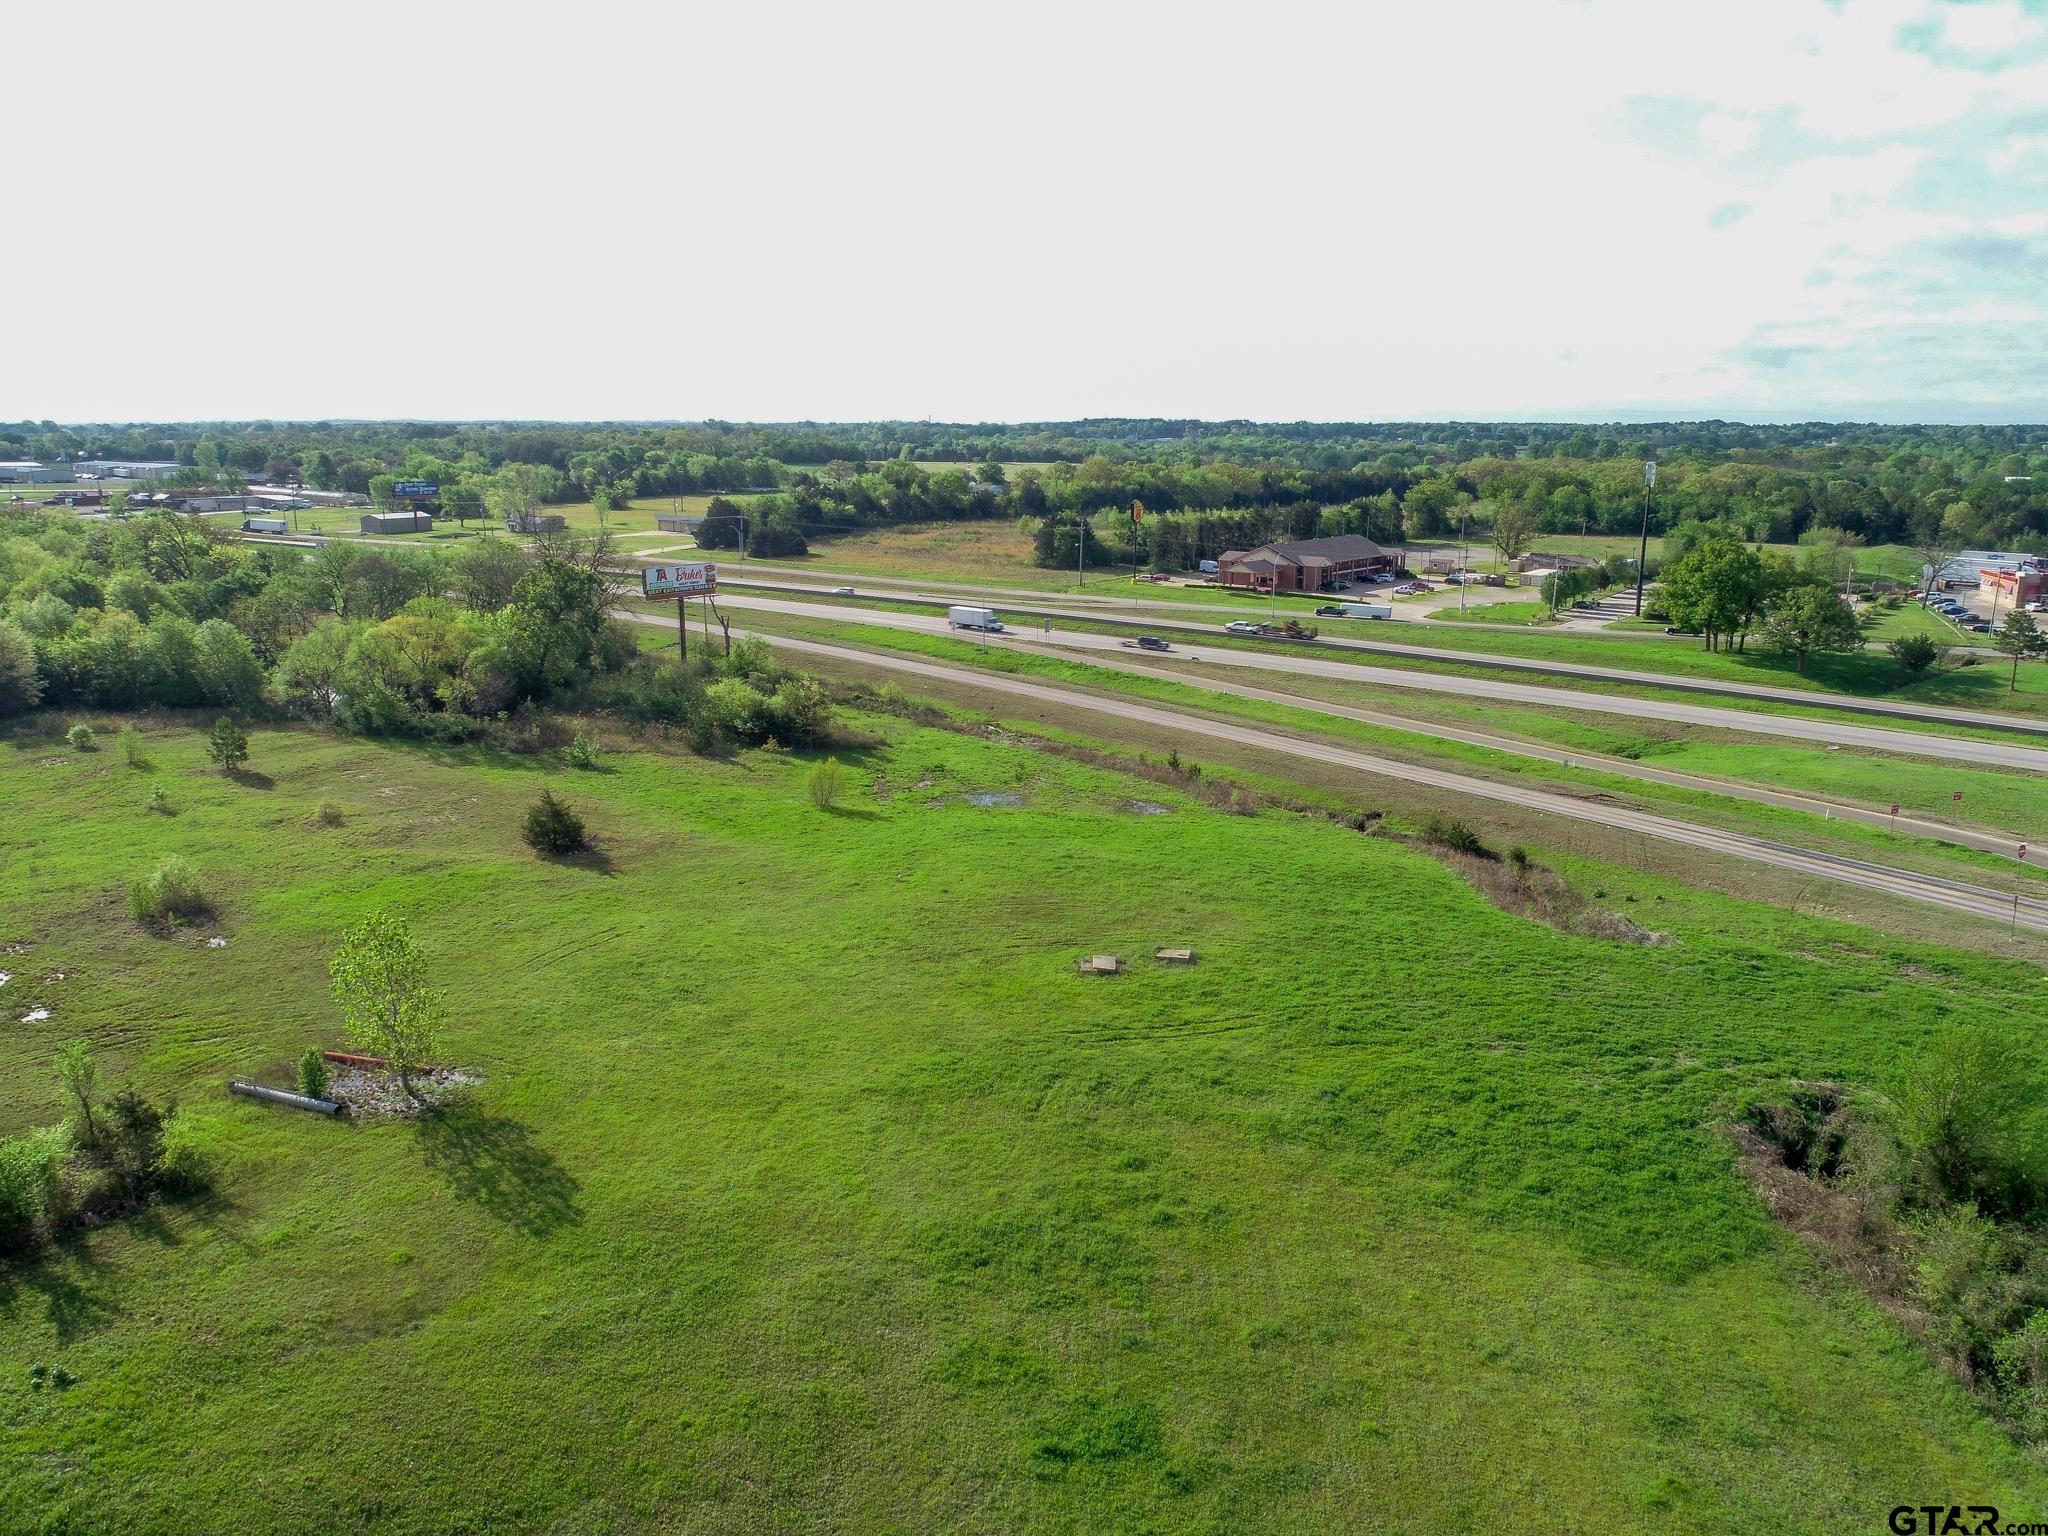 The east end of the property with I-30 in the background.